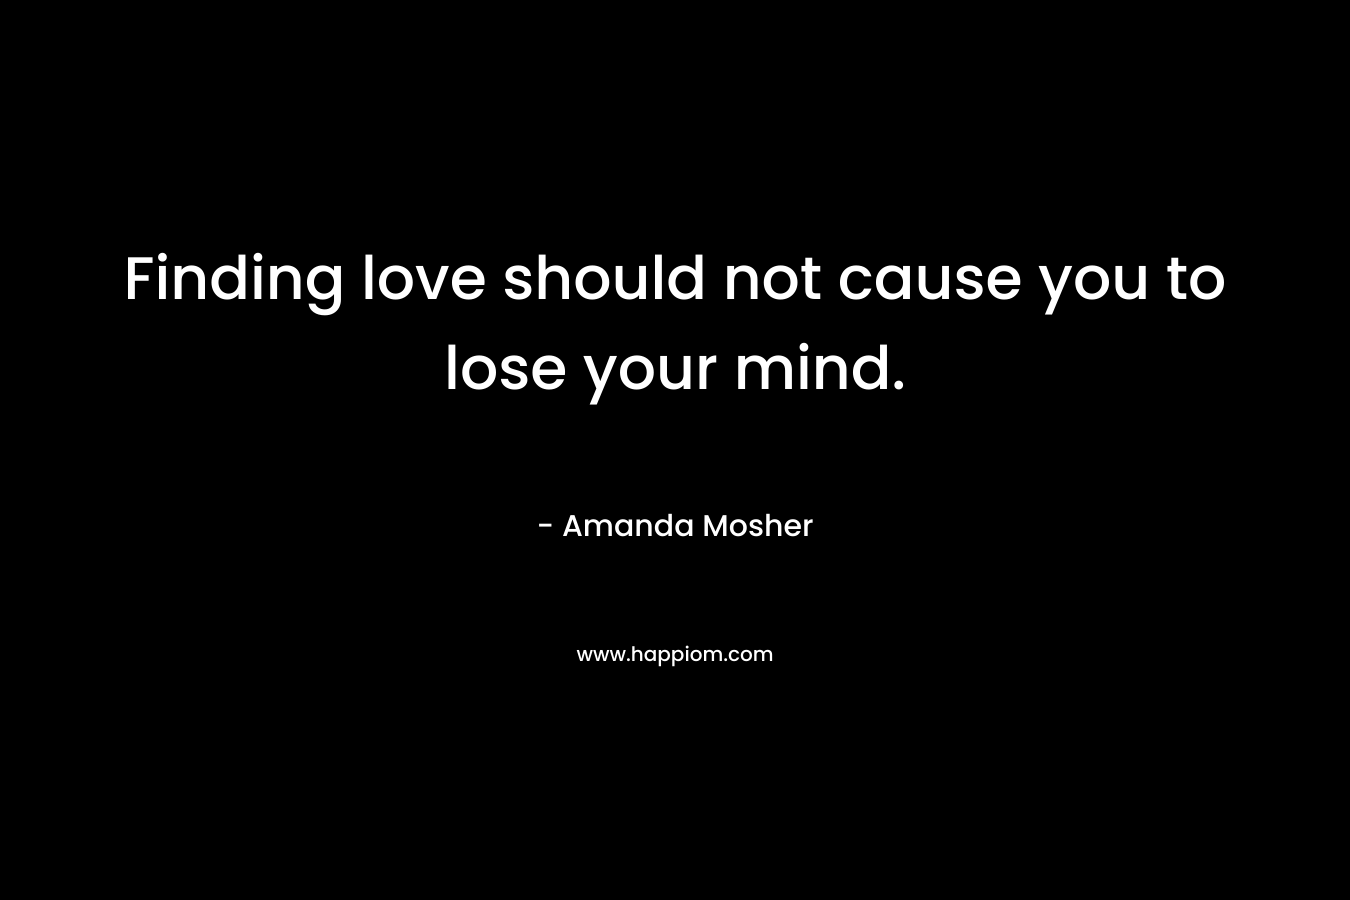 Finding love should not cause you to lose your mind.